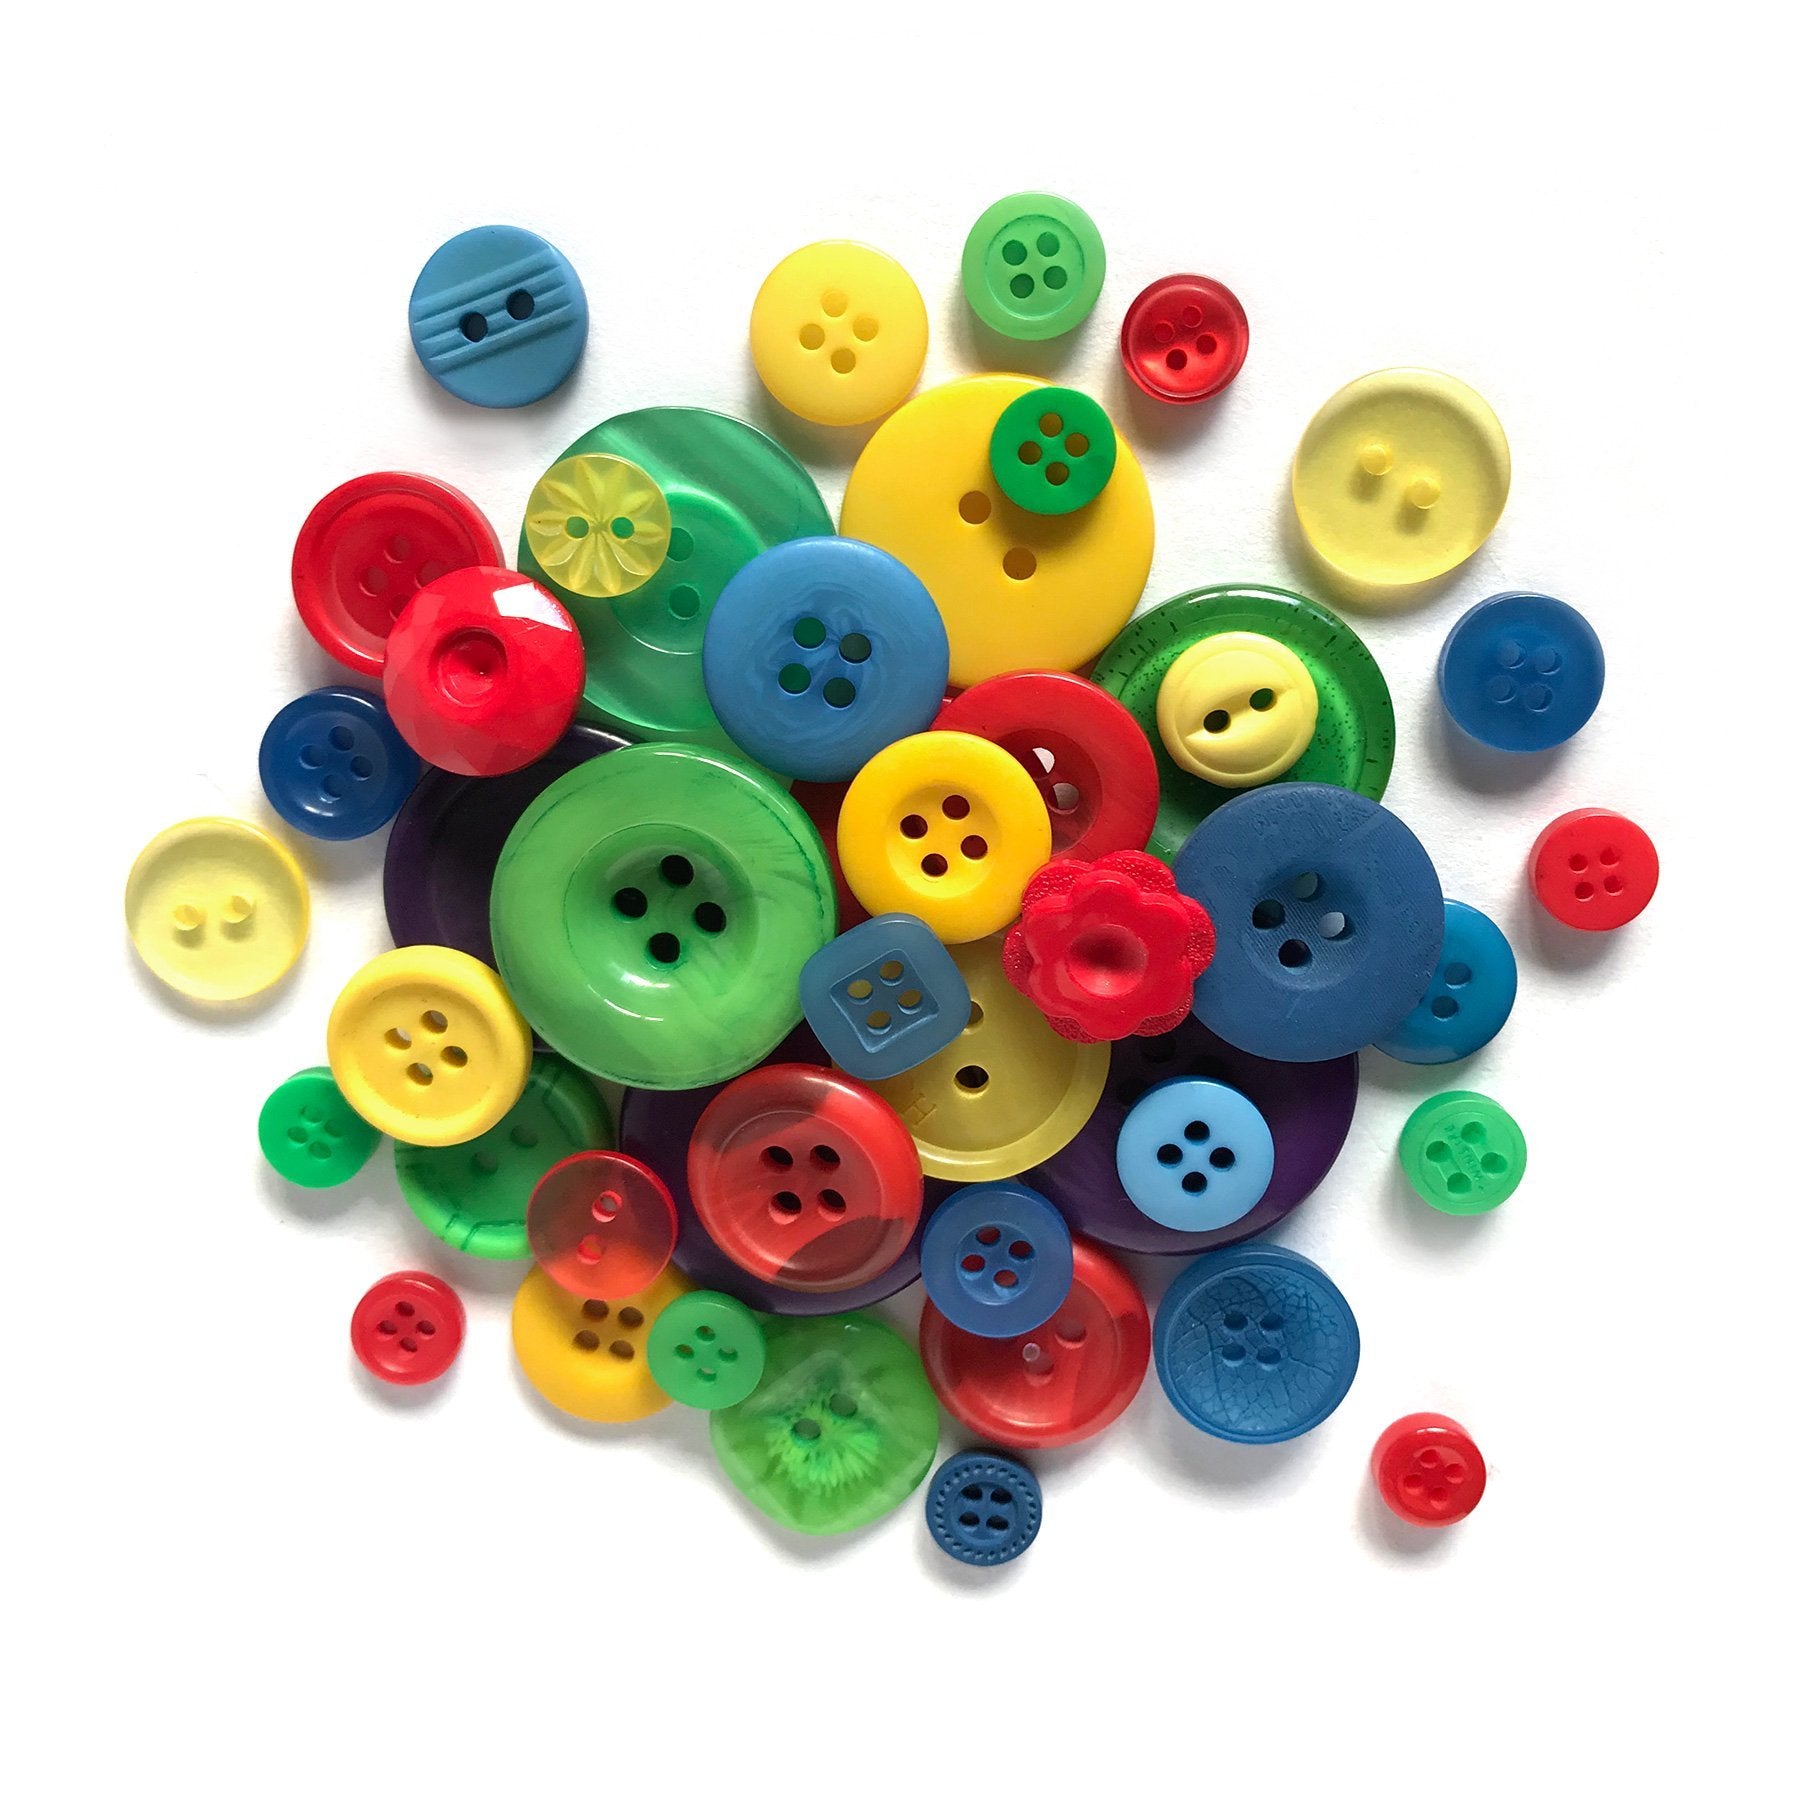 Assorted Plastic Sewing Buttons for Sewing Crafts Clothes Coats by Mandala Crafts Bulk Wholesale Pack Multi Color 300 Pcs 18mm 0.7 inch